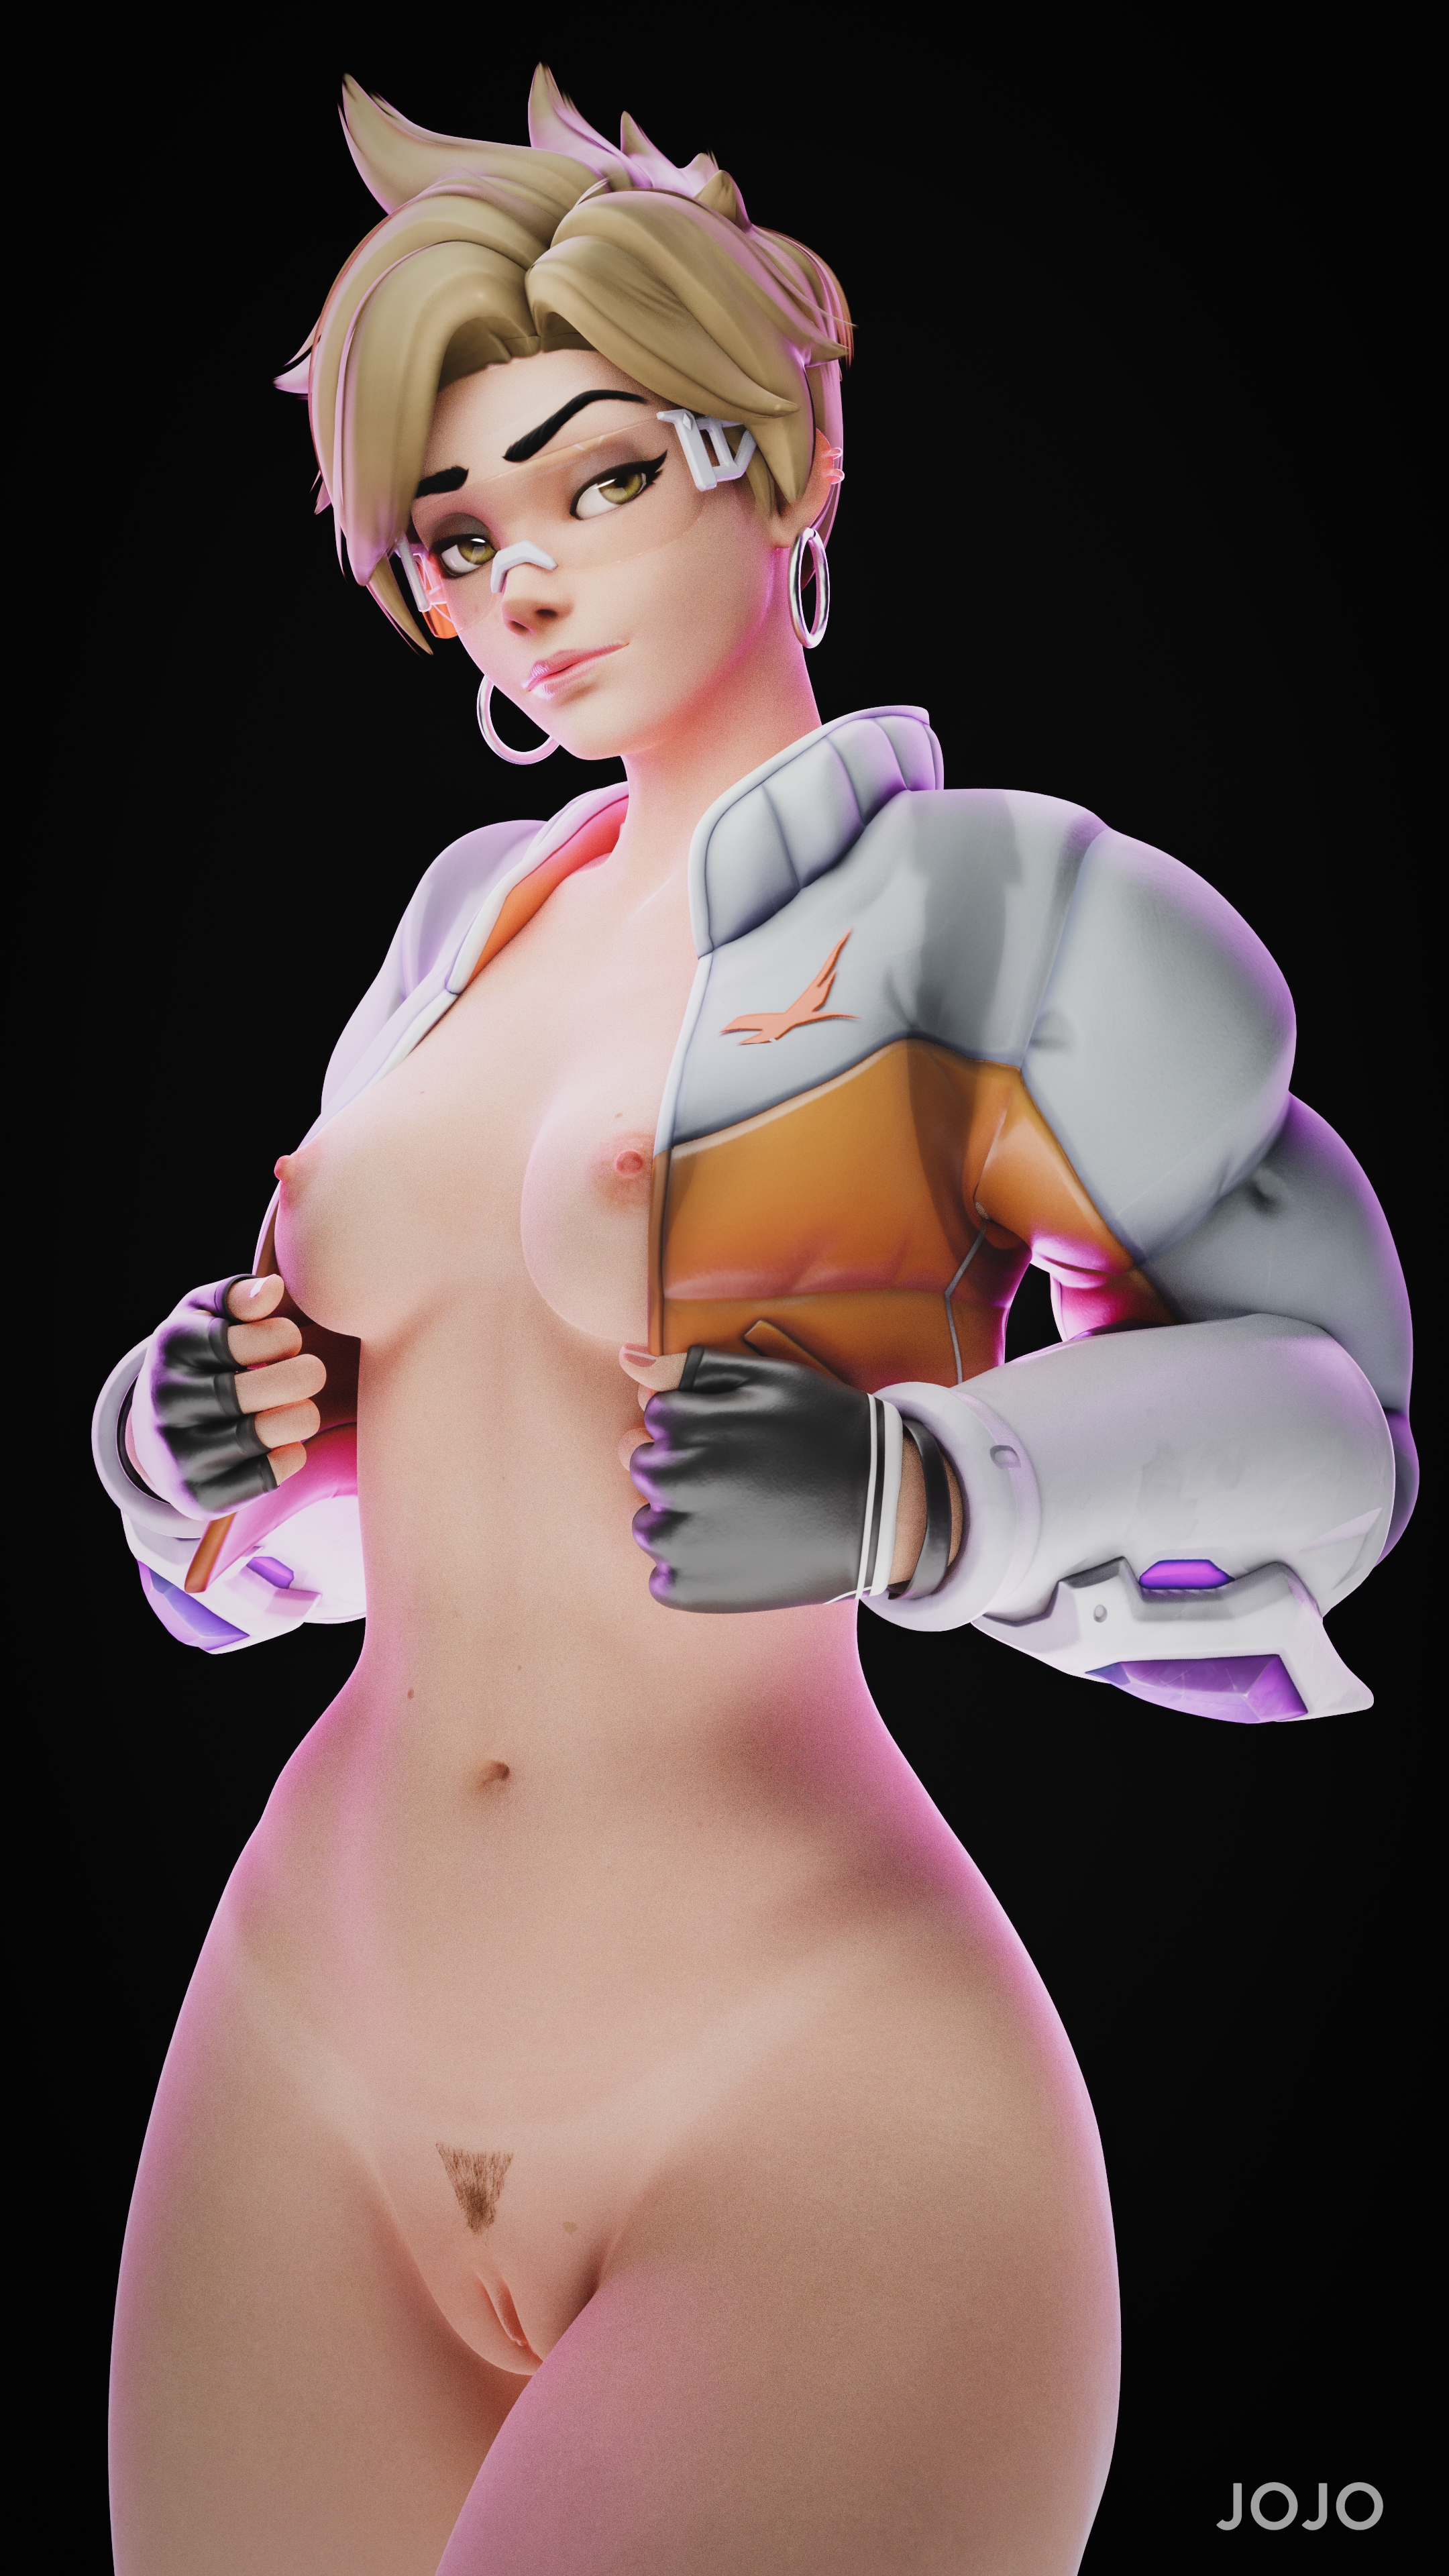 Tracer LE SSERAFIM (5/11) Tracer Overwatch Boobs Pussy